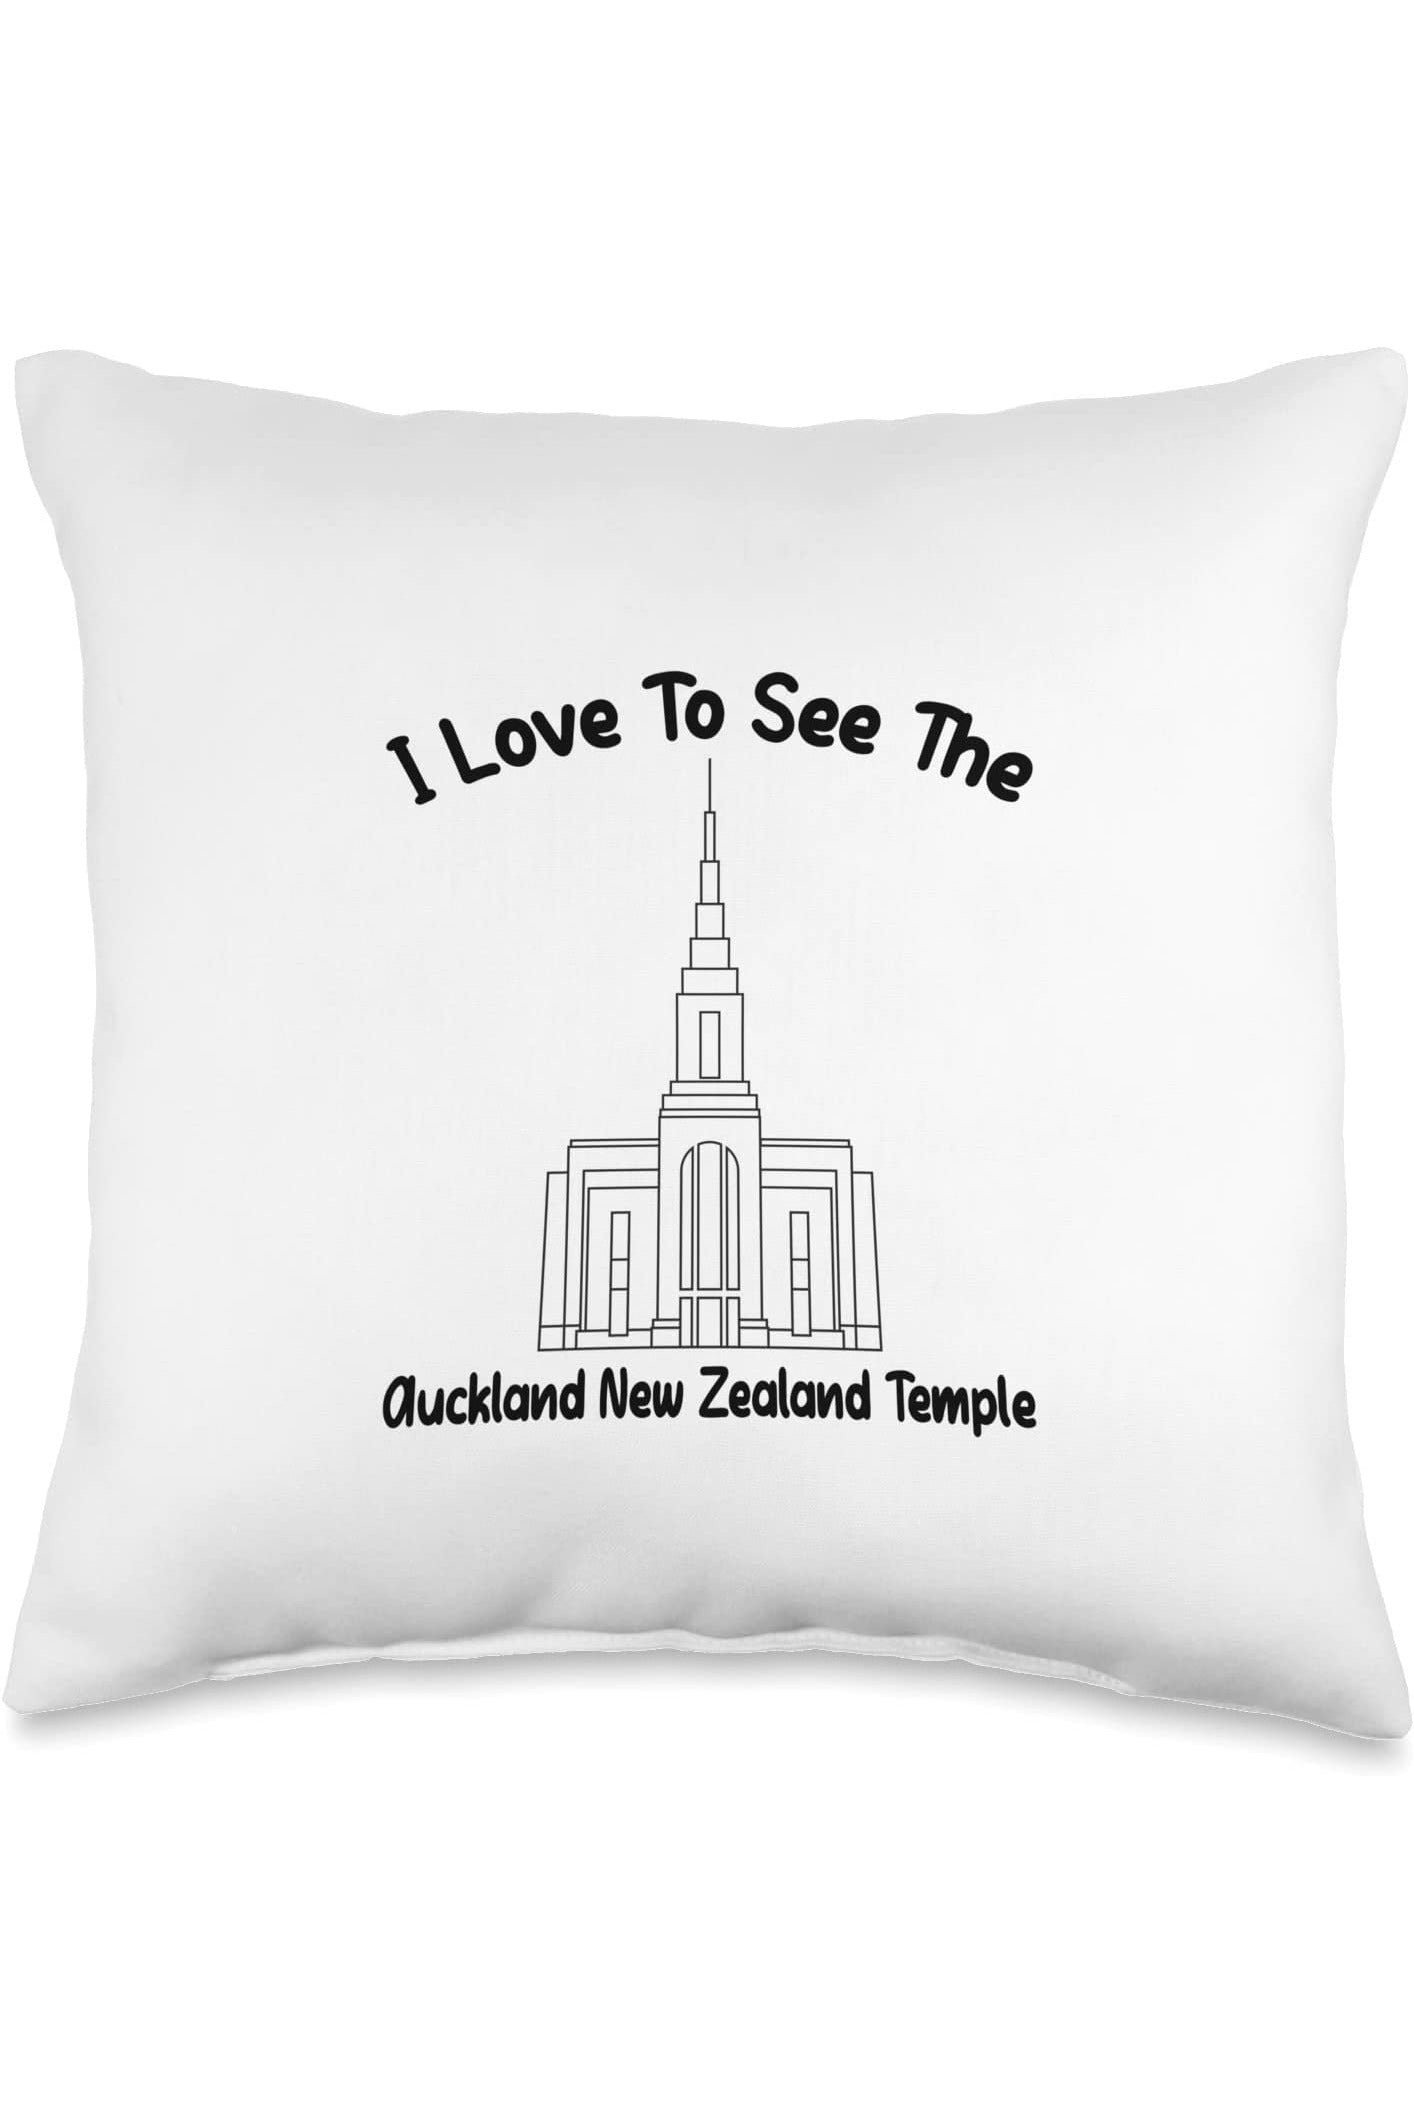 Auckland New Zealand Temple Throw Pillows - Primary Style (English) US